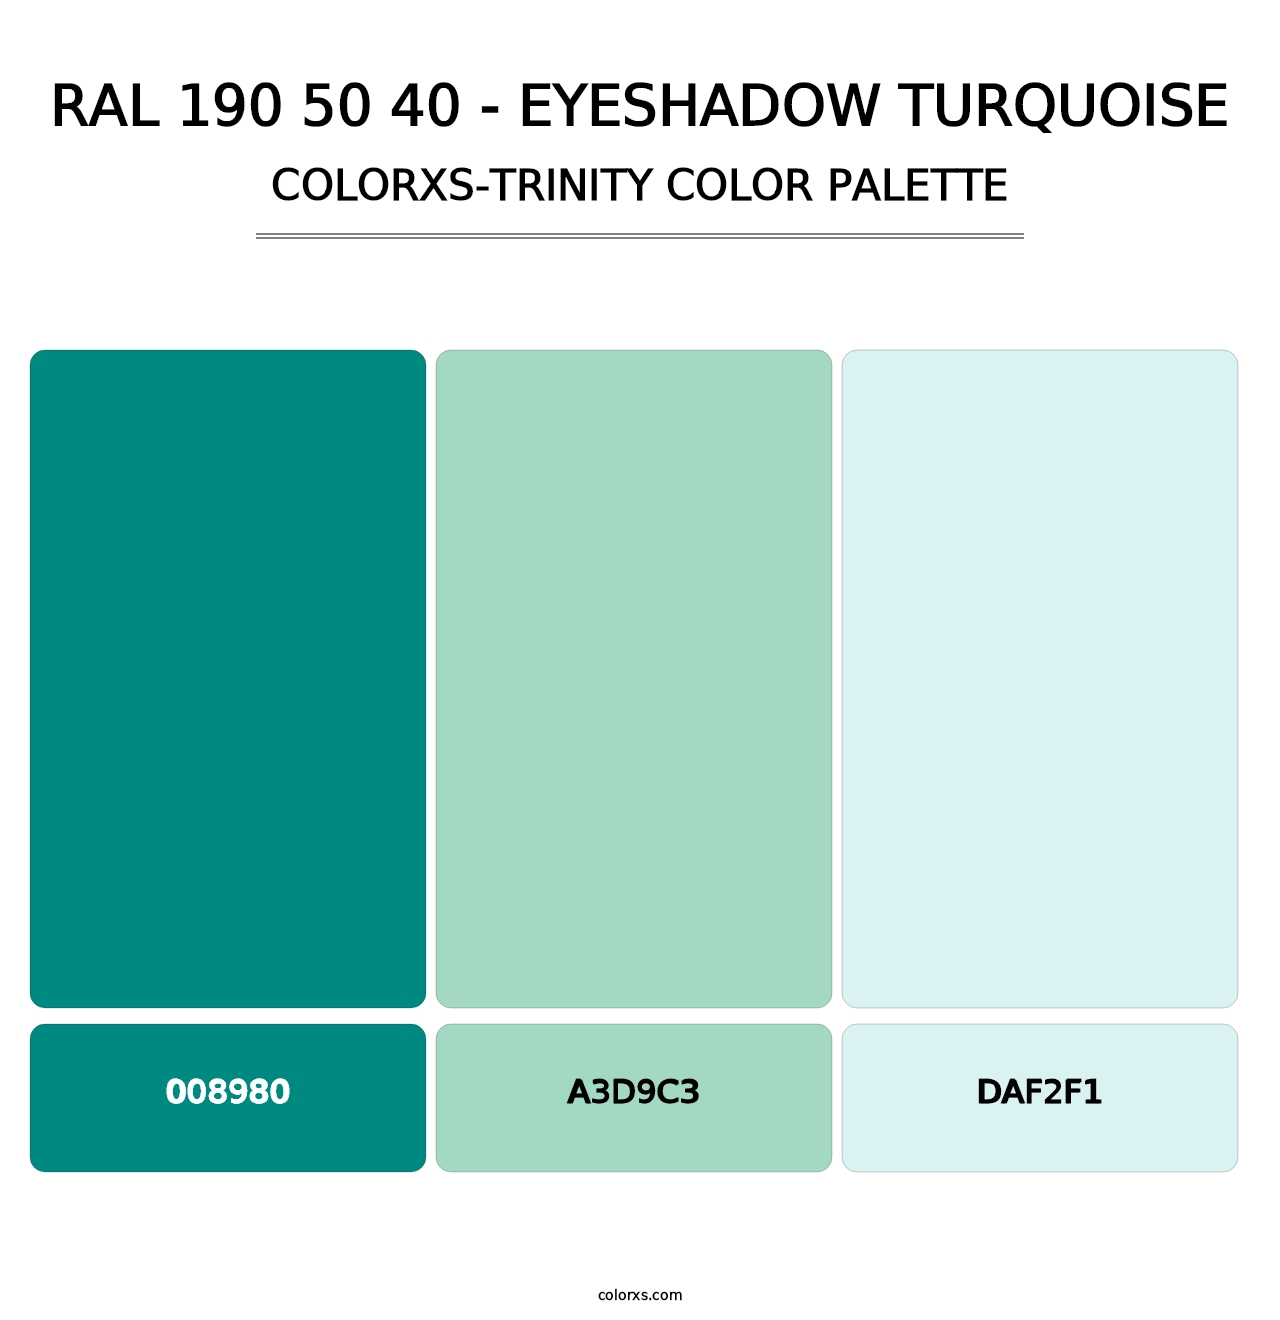 RAL 190 50 40 - Eyeshadow Turquoise - Colorxs Trinity Palette